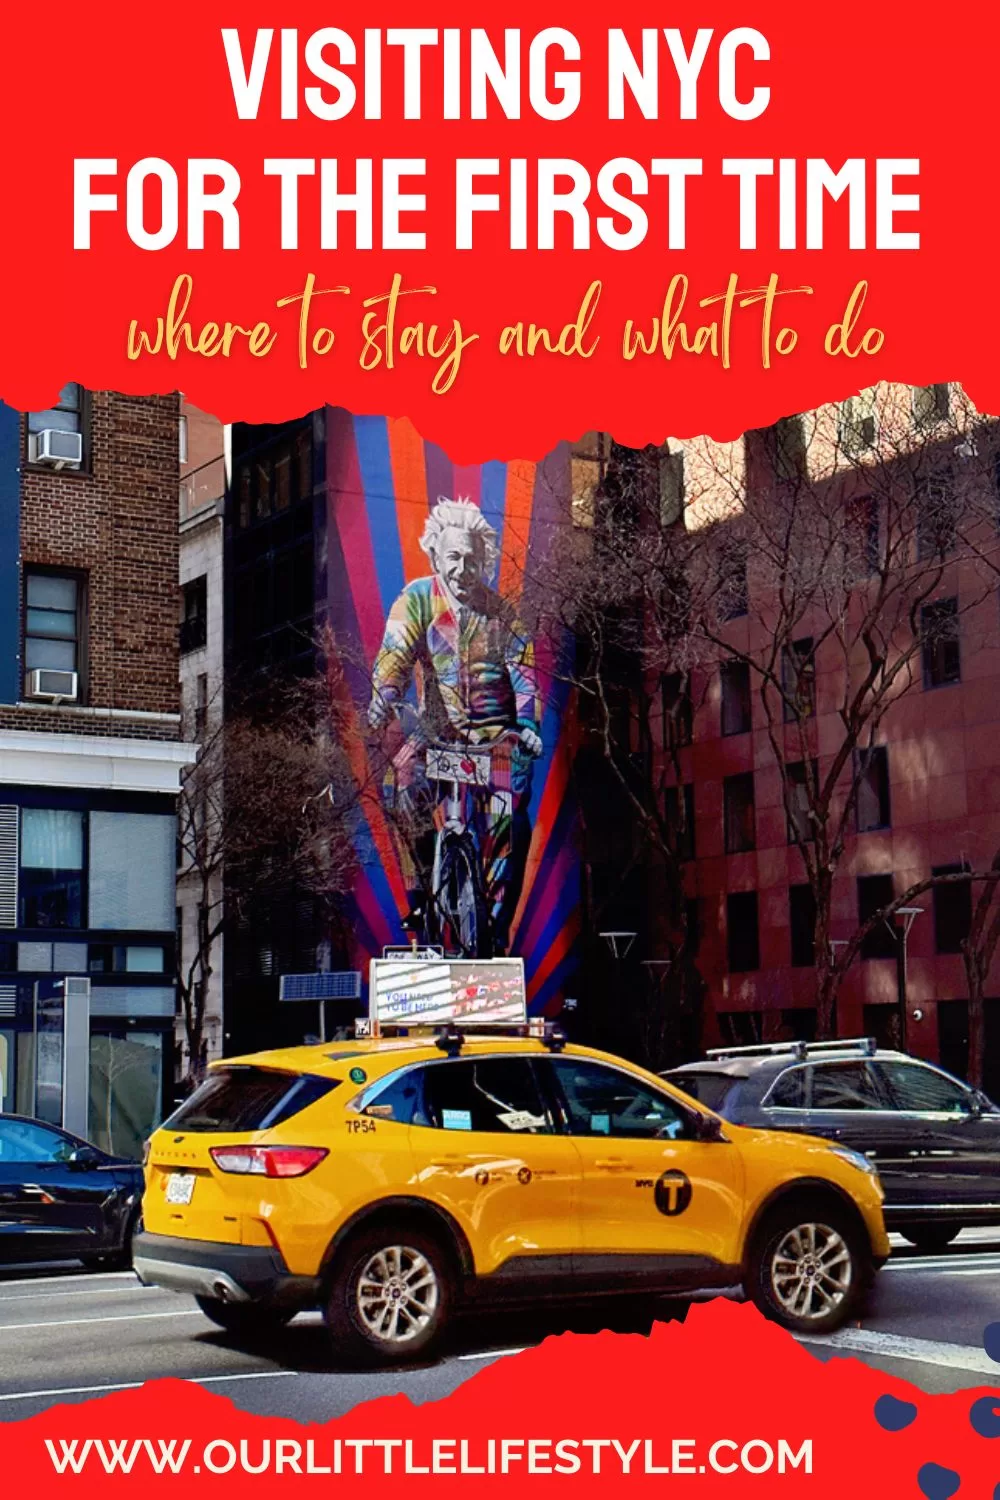 Visiting NYC for the First Time Blog Post Pinterest Pin.  Image shows a yellow taxi and a mural.